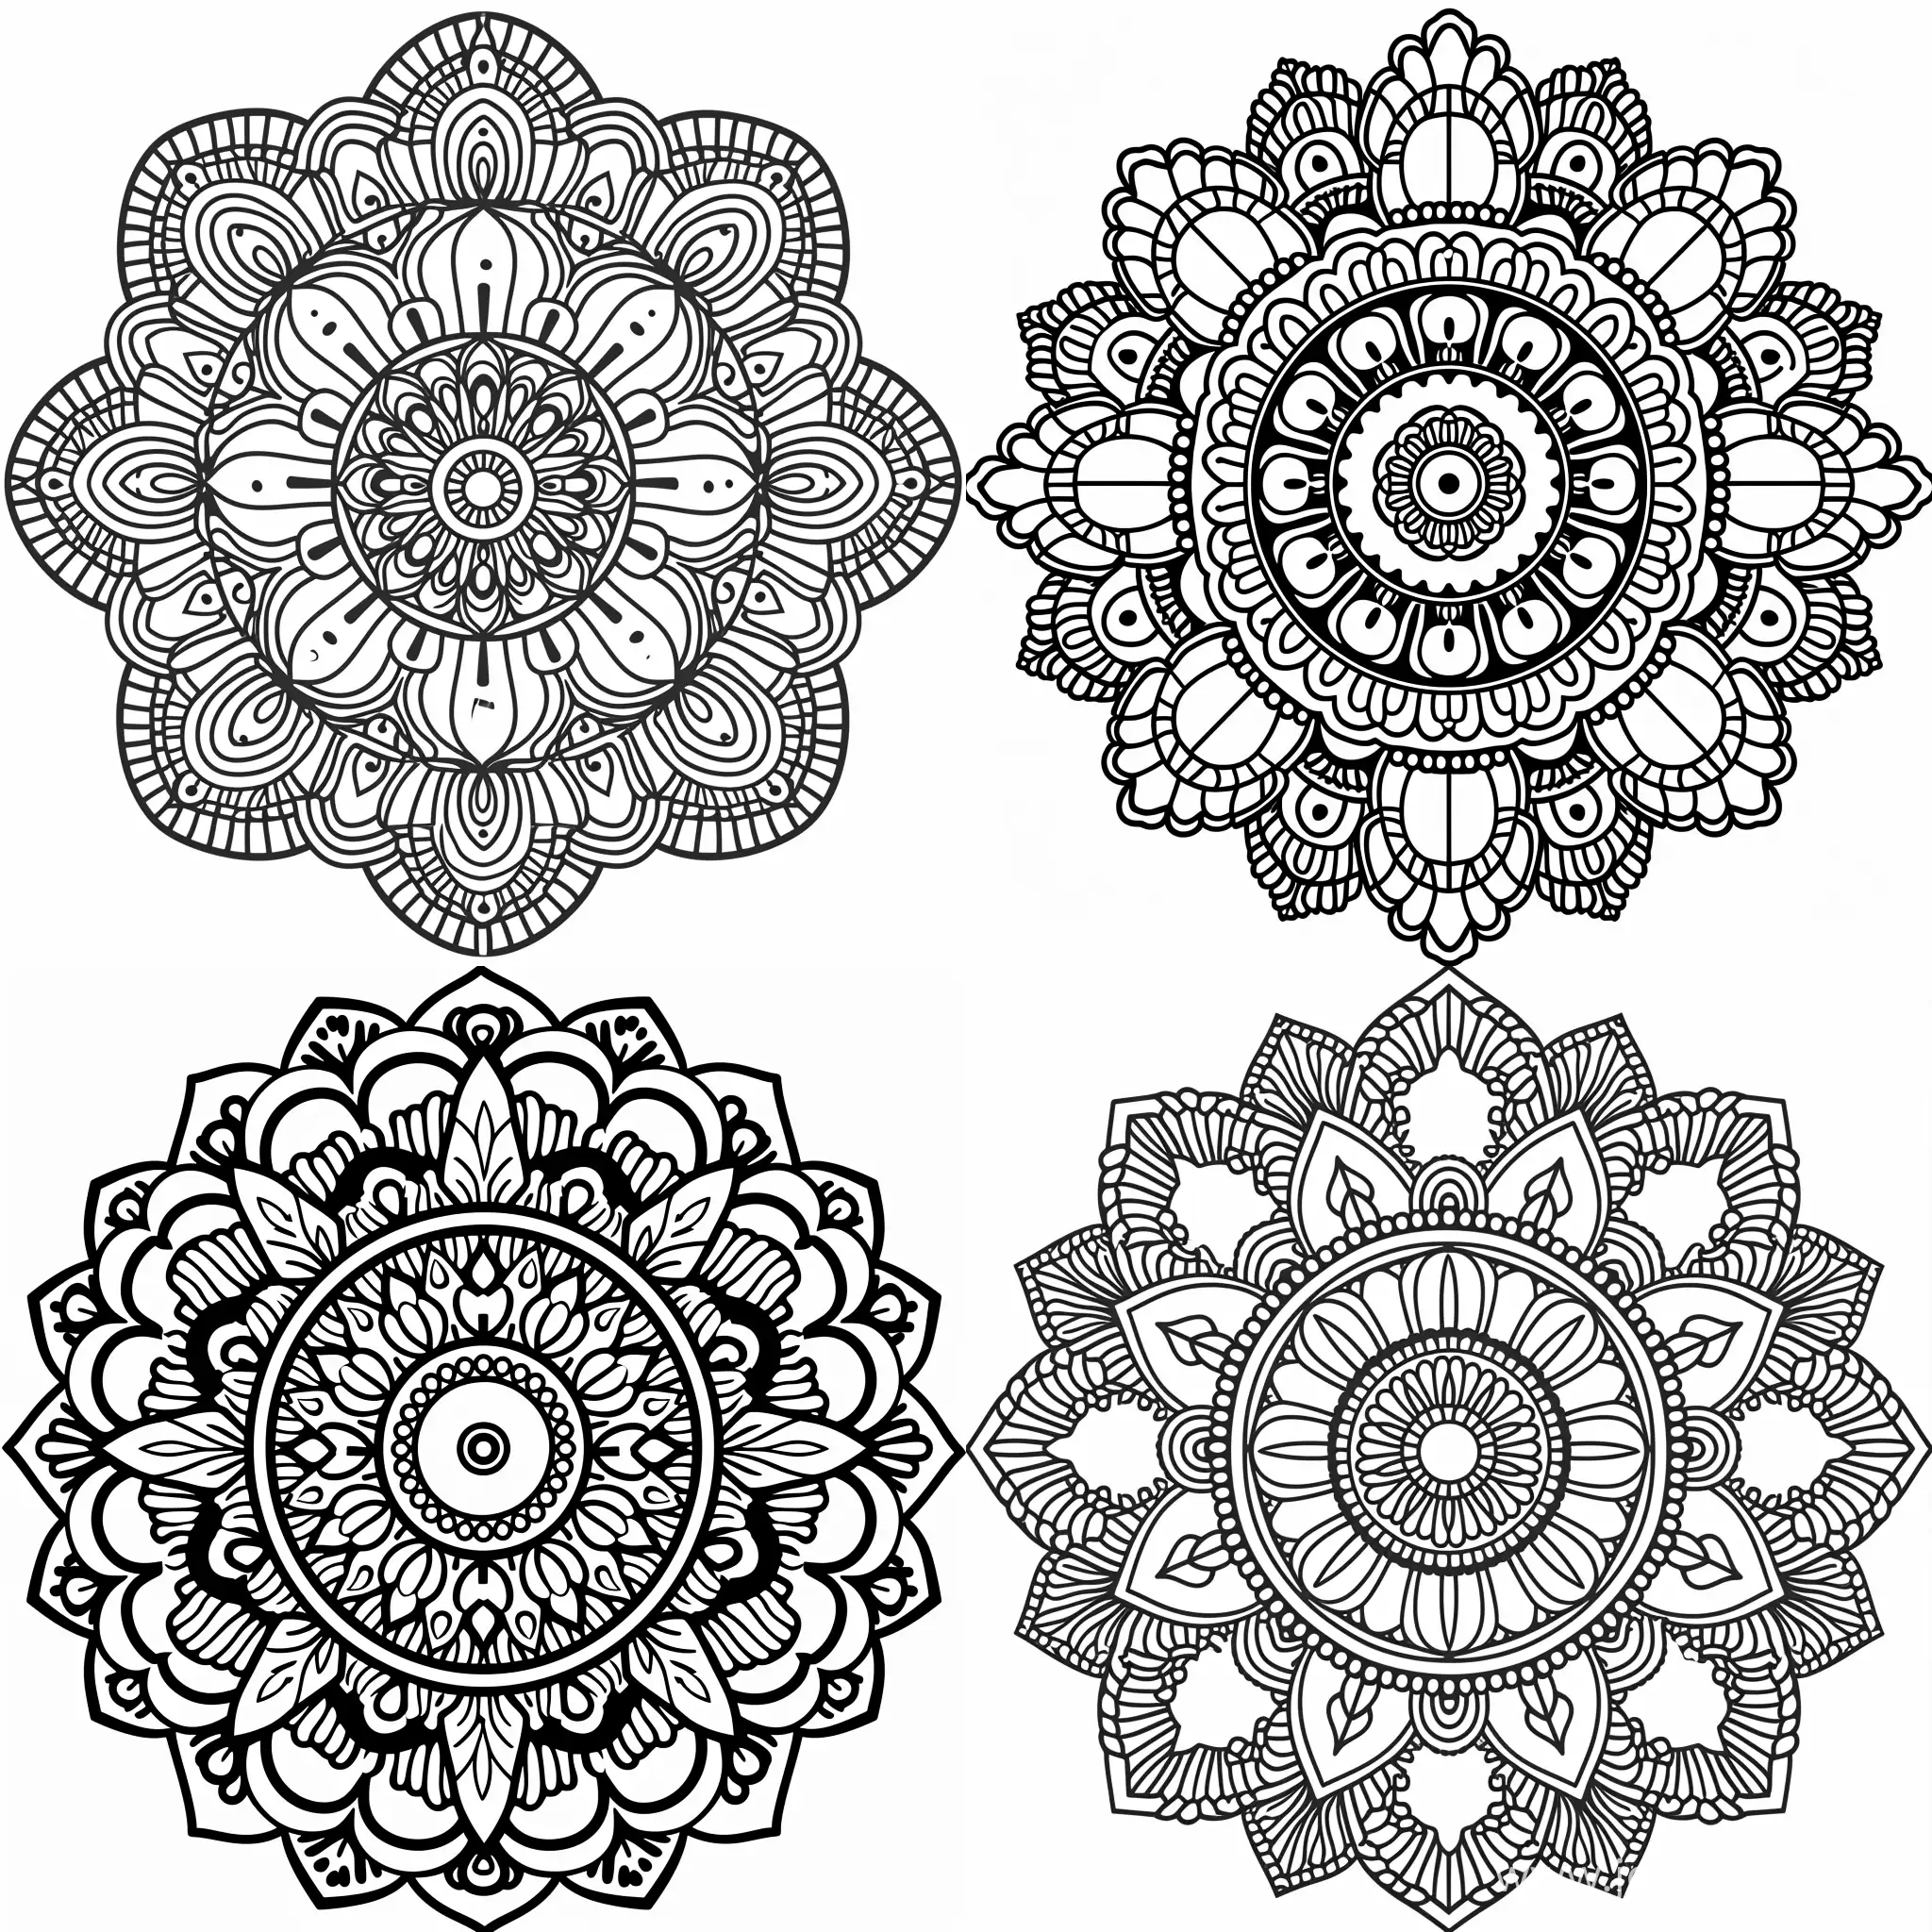 Mandala-Coloring-Pages-for-Amazon-KDP-and-Etsy